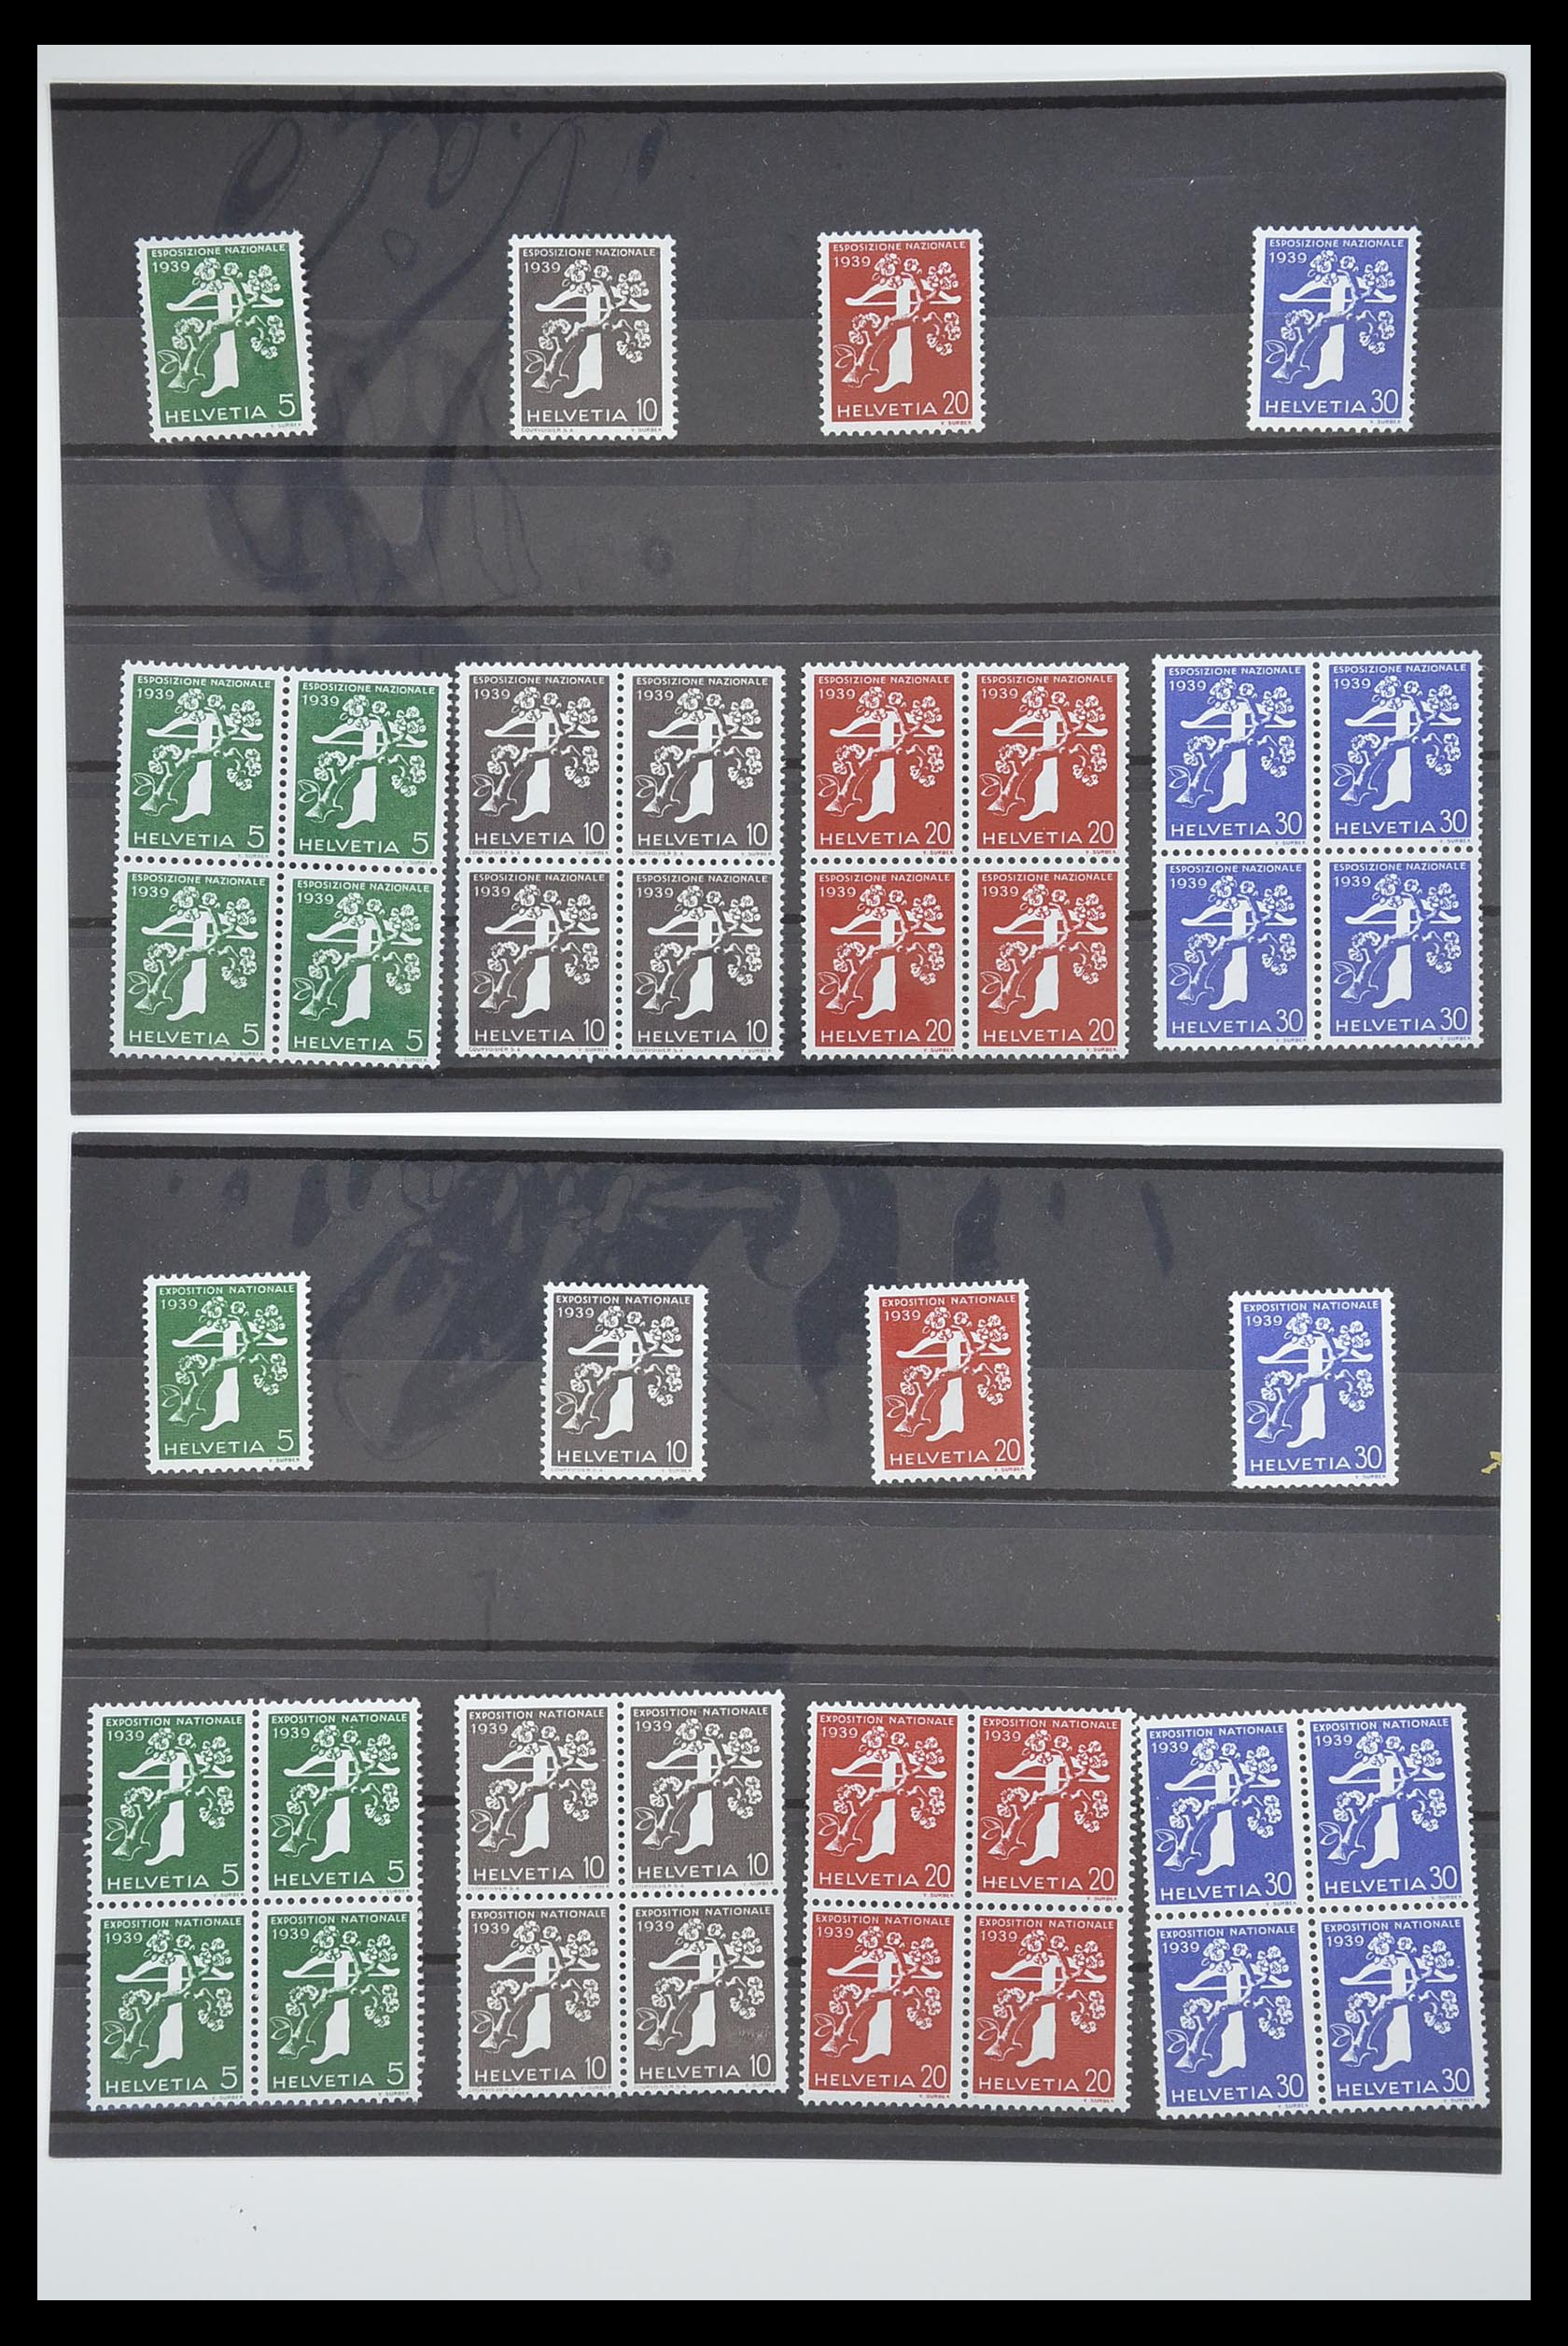 33284 029 - Stamp collection 33284 Switzerland better issues 1900-1995.